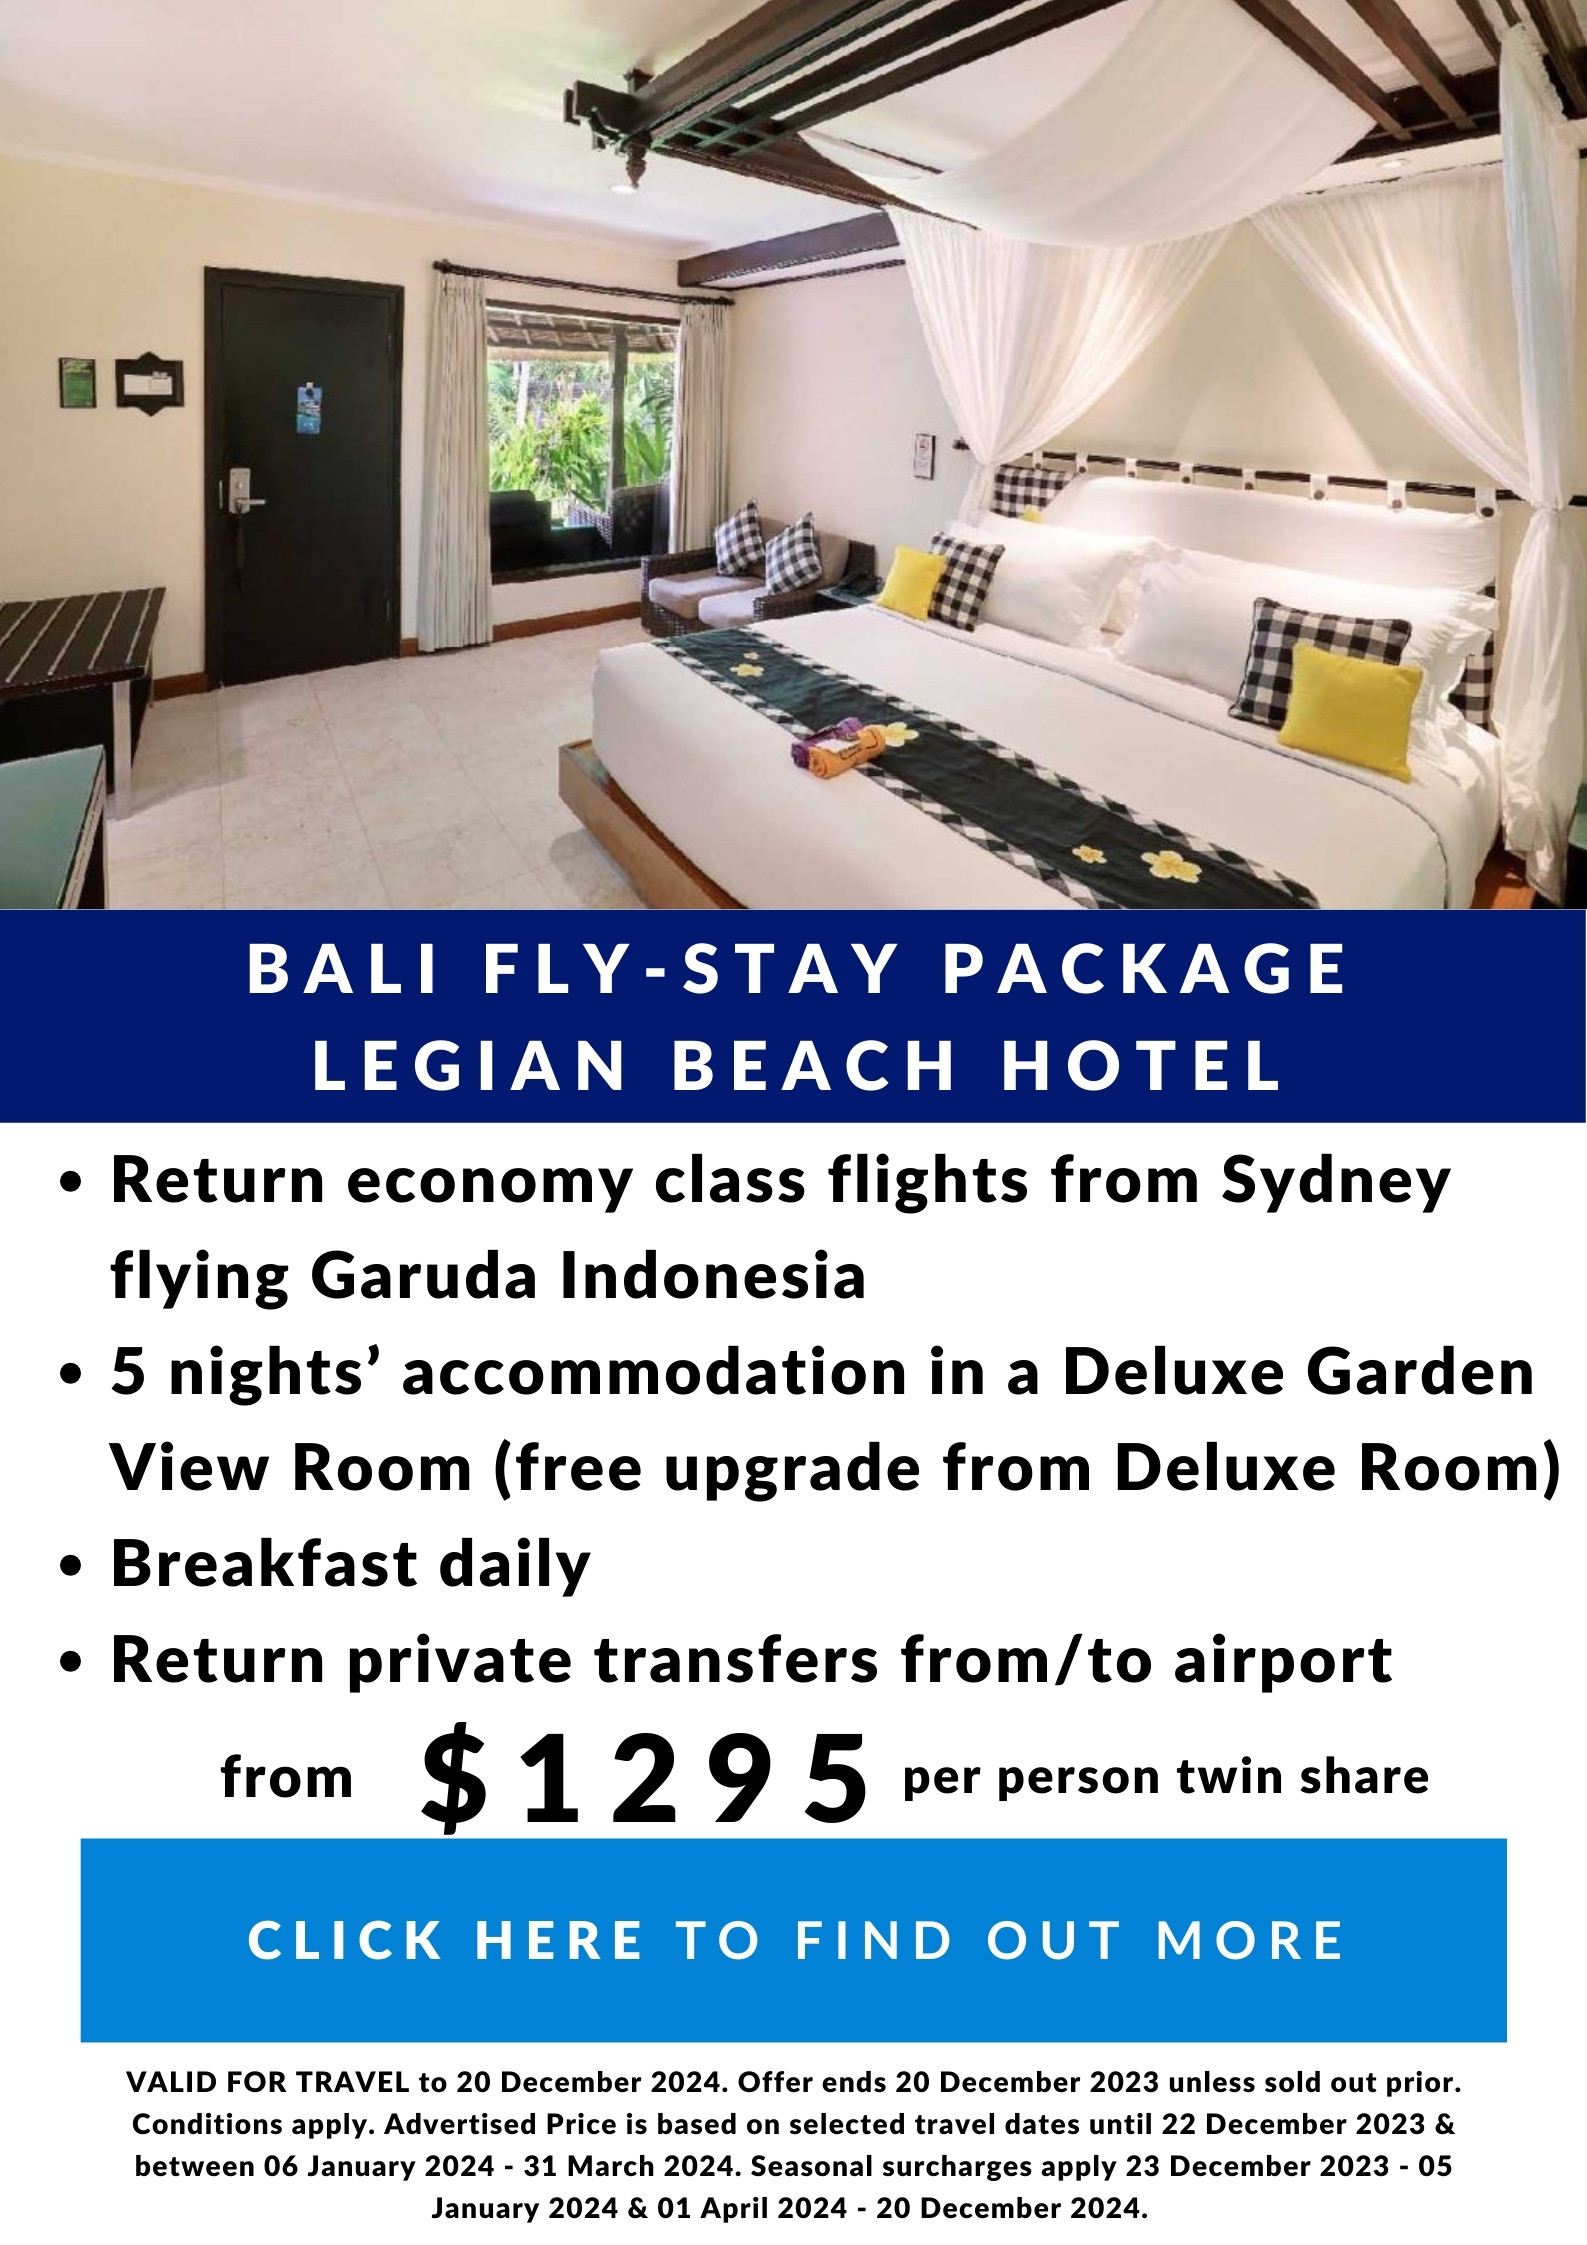 From $1295 per person twin share